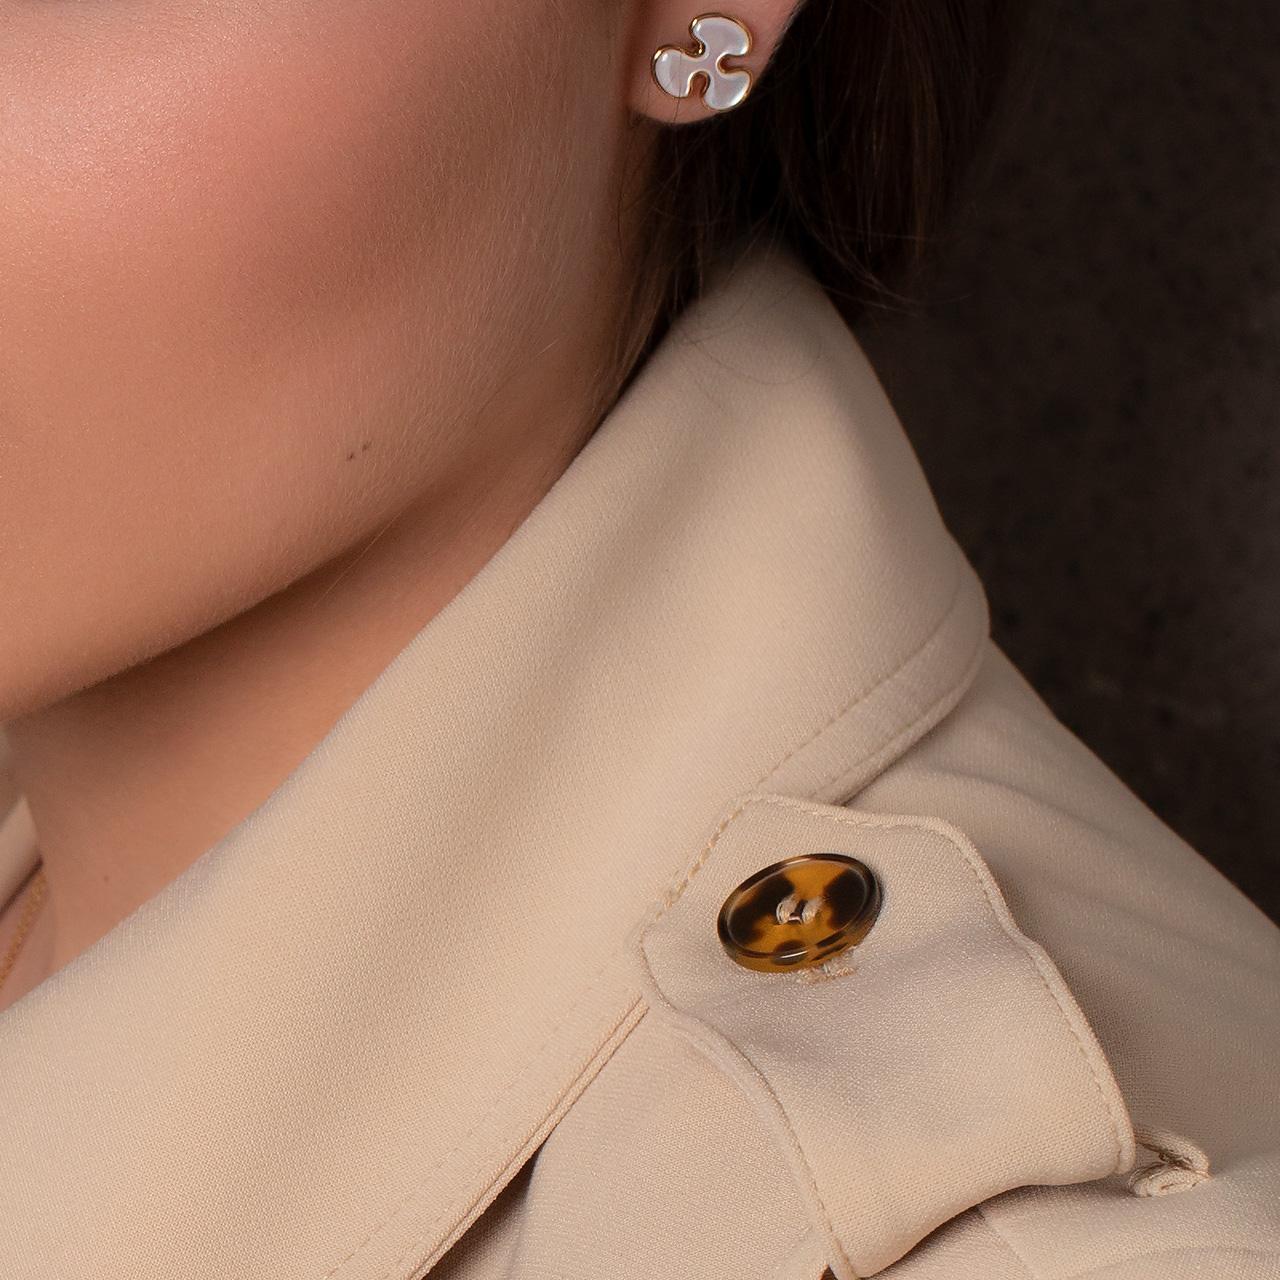 - 2 White Mother-of-pearl
- 14K Yellow Gold 
- Weight: 4.51 g
This delicate pair of studs in 14k yellow gold are form Free Forms collection. This unusual collection gives rise to all sorts of associations: droplets of ink escaping from an elegant